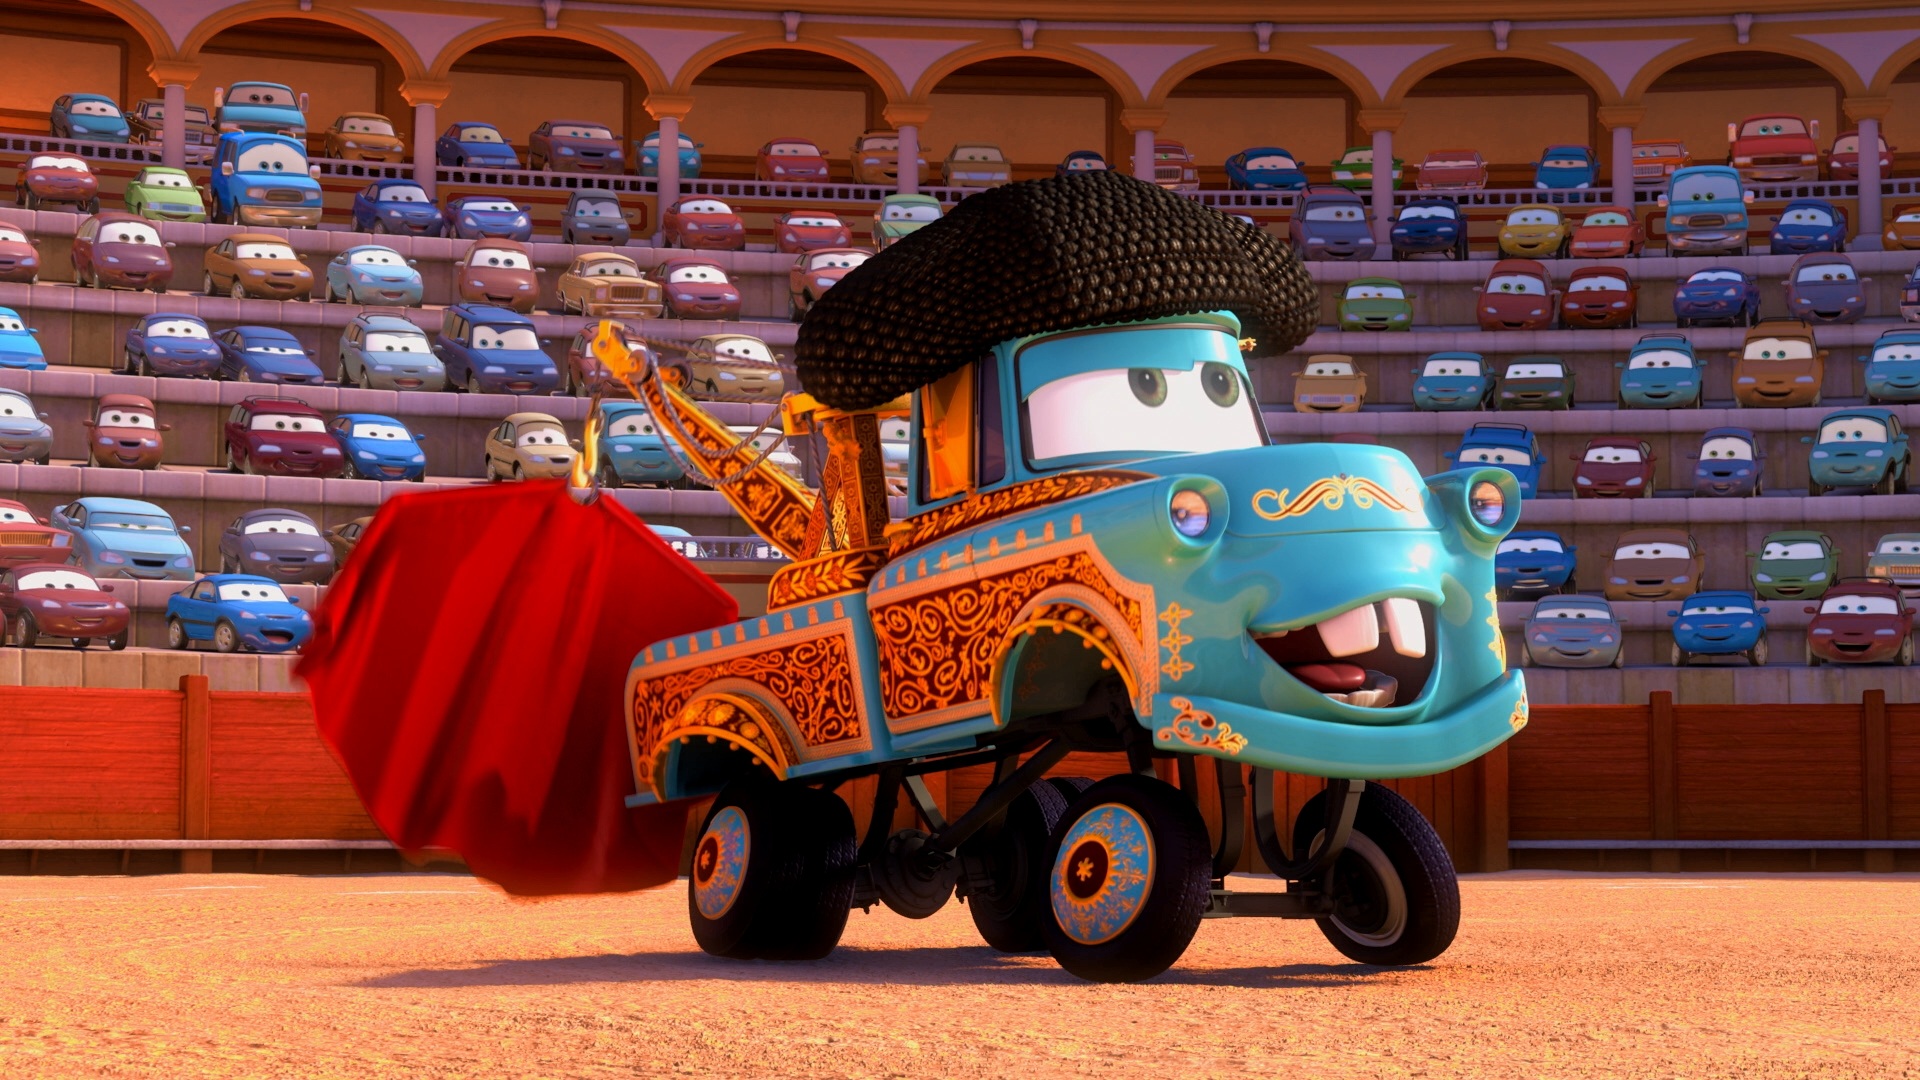 mater's tall tales, tv show